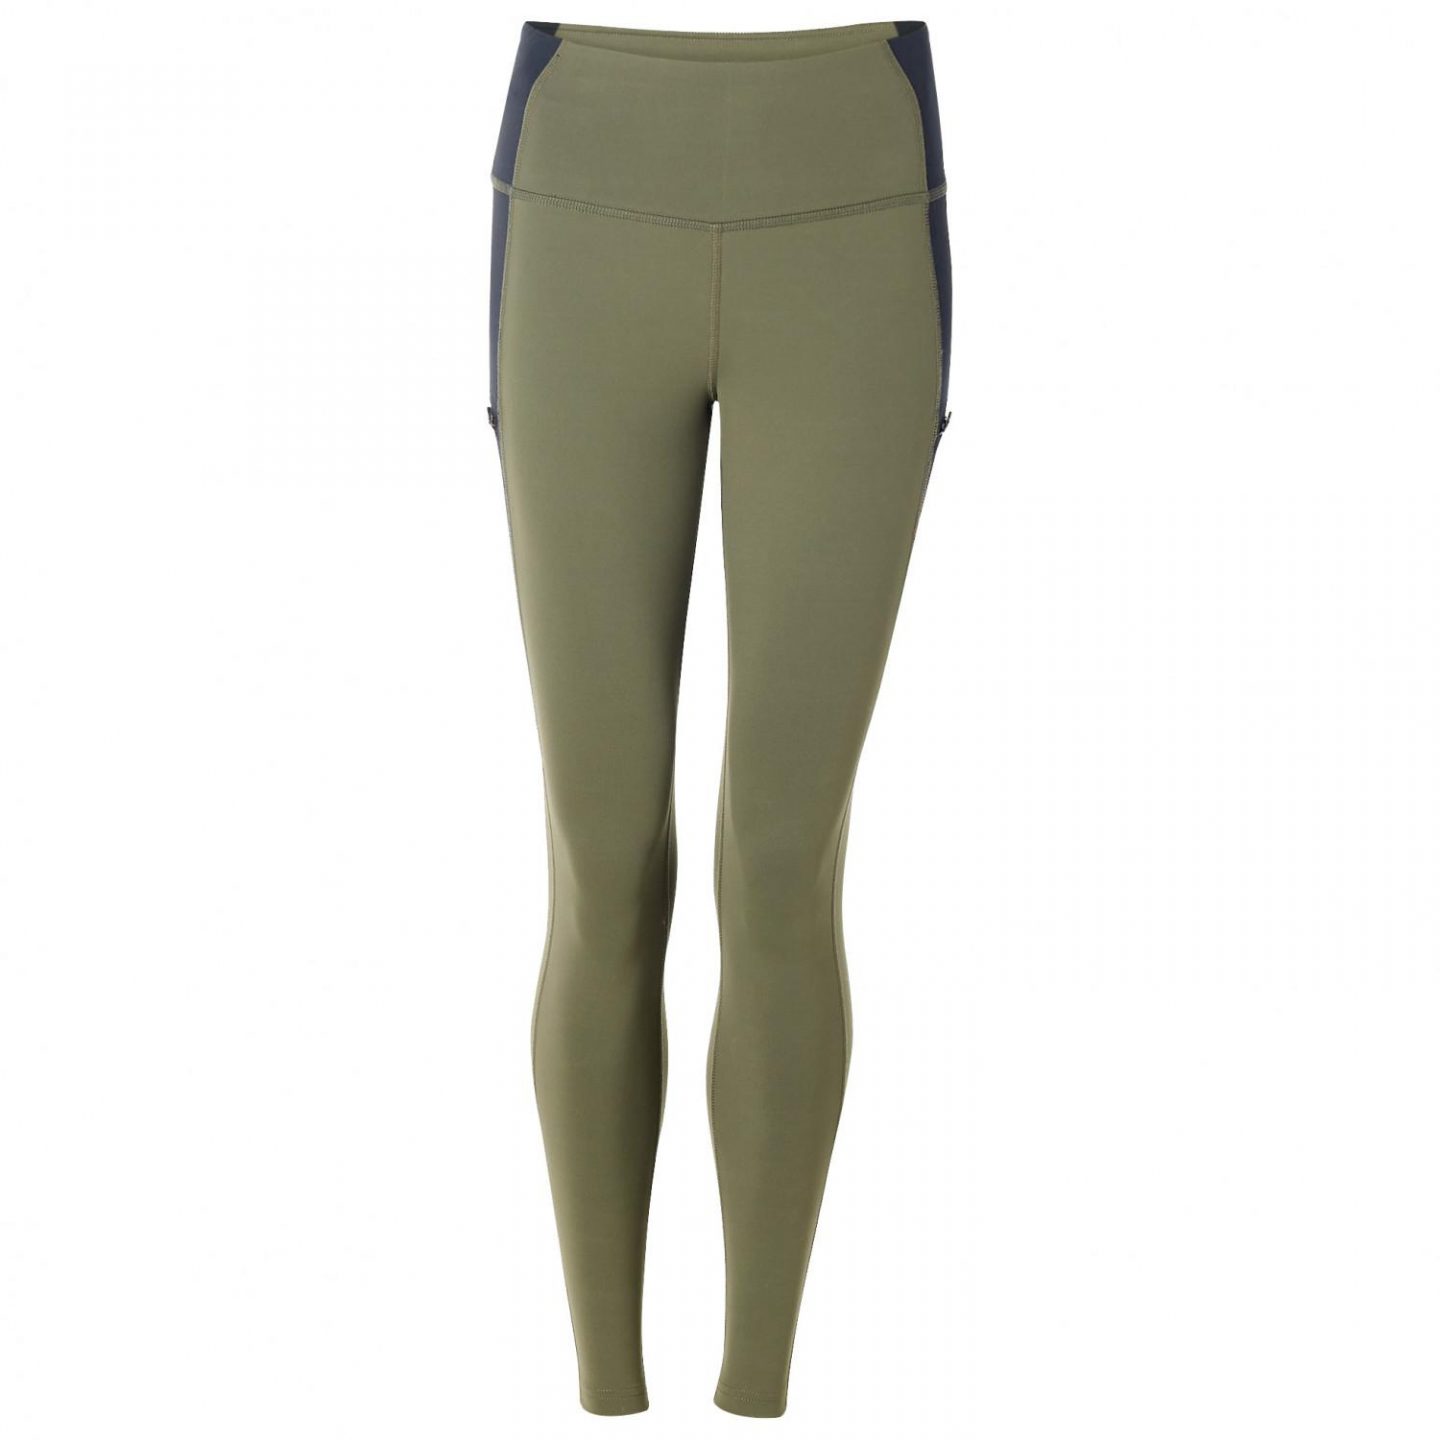 The Best Hiking Trousers For Women | Best Trekking Tights For Women